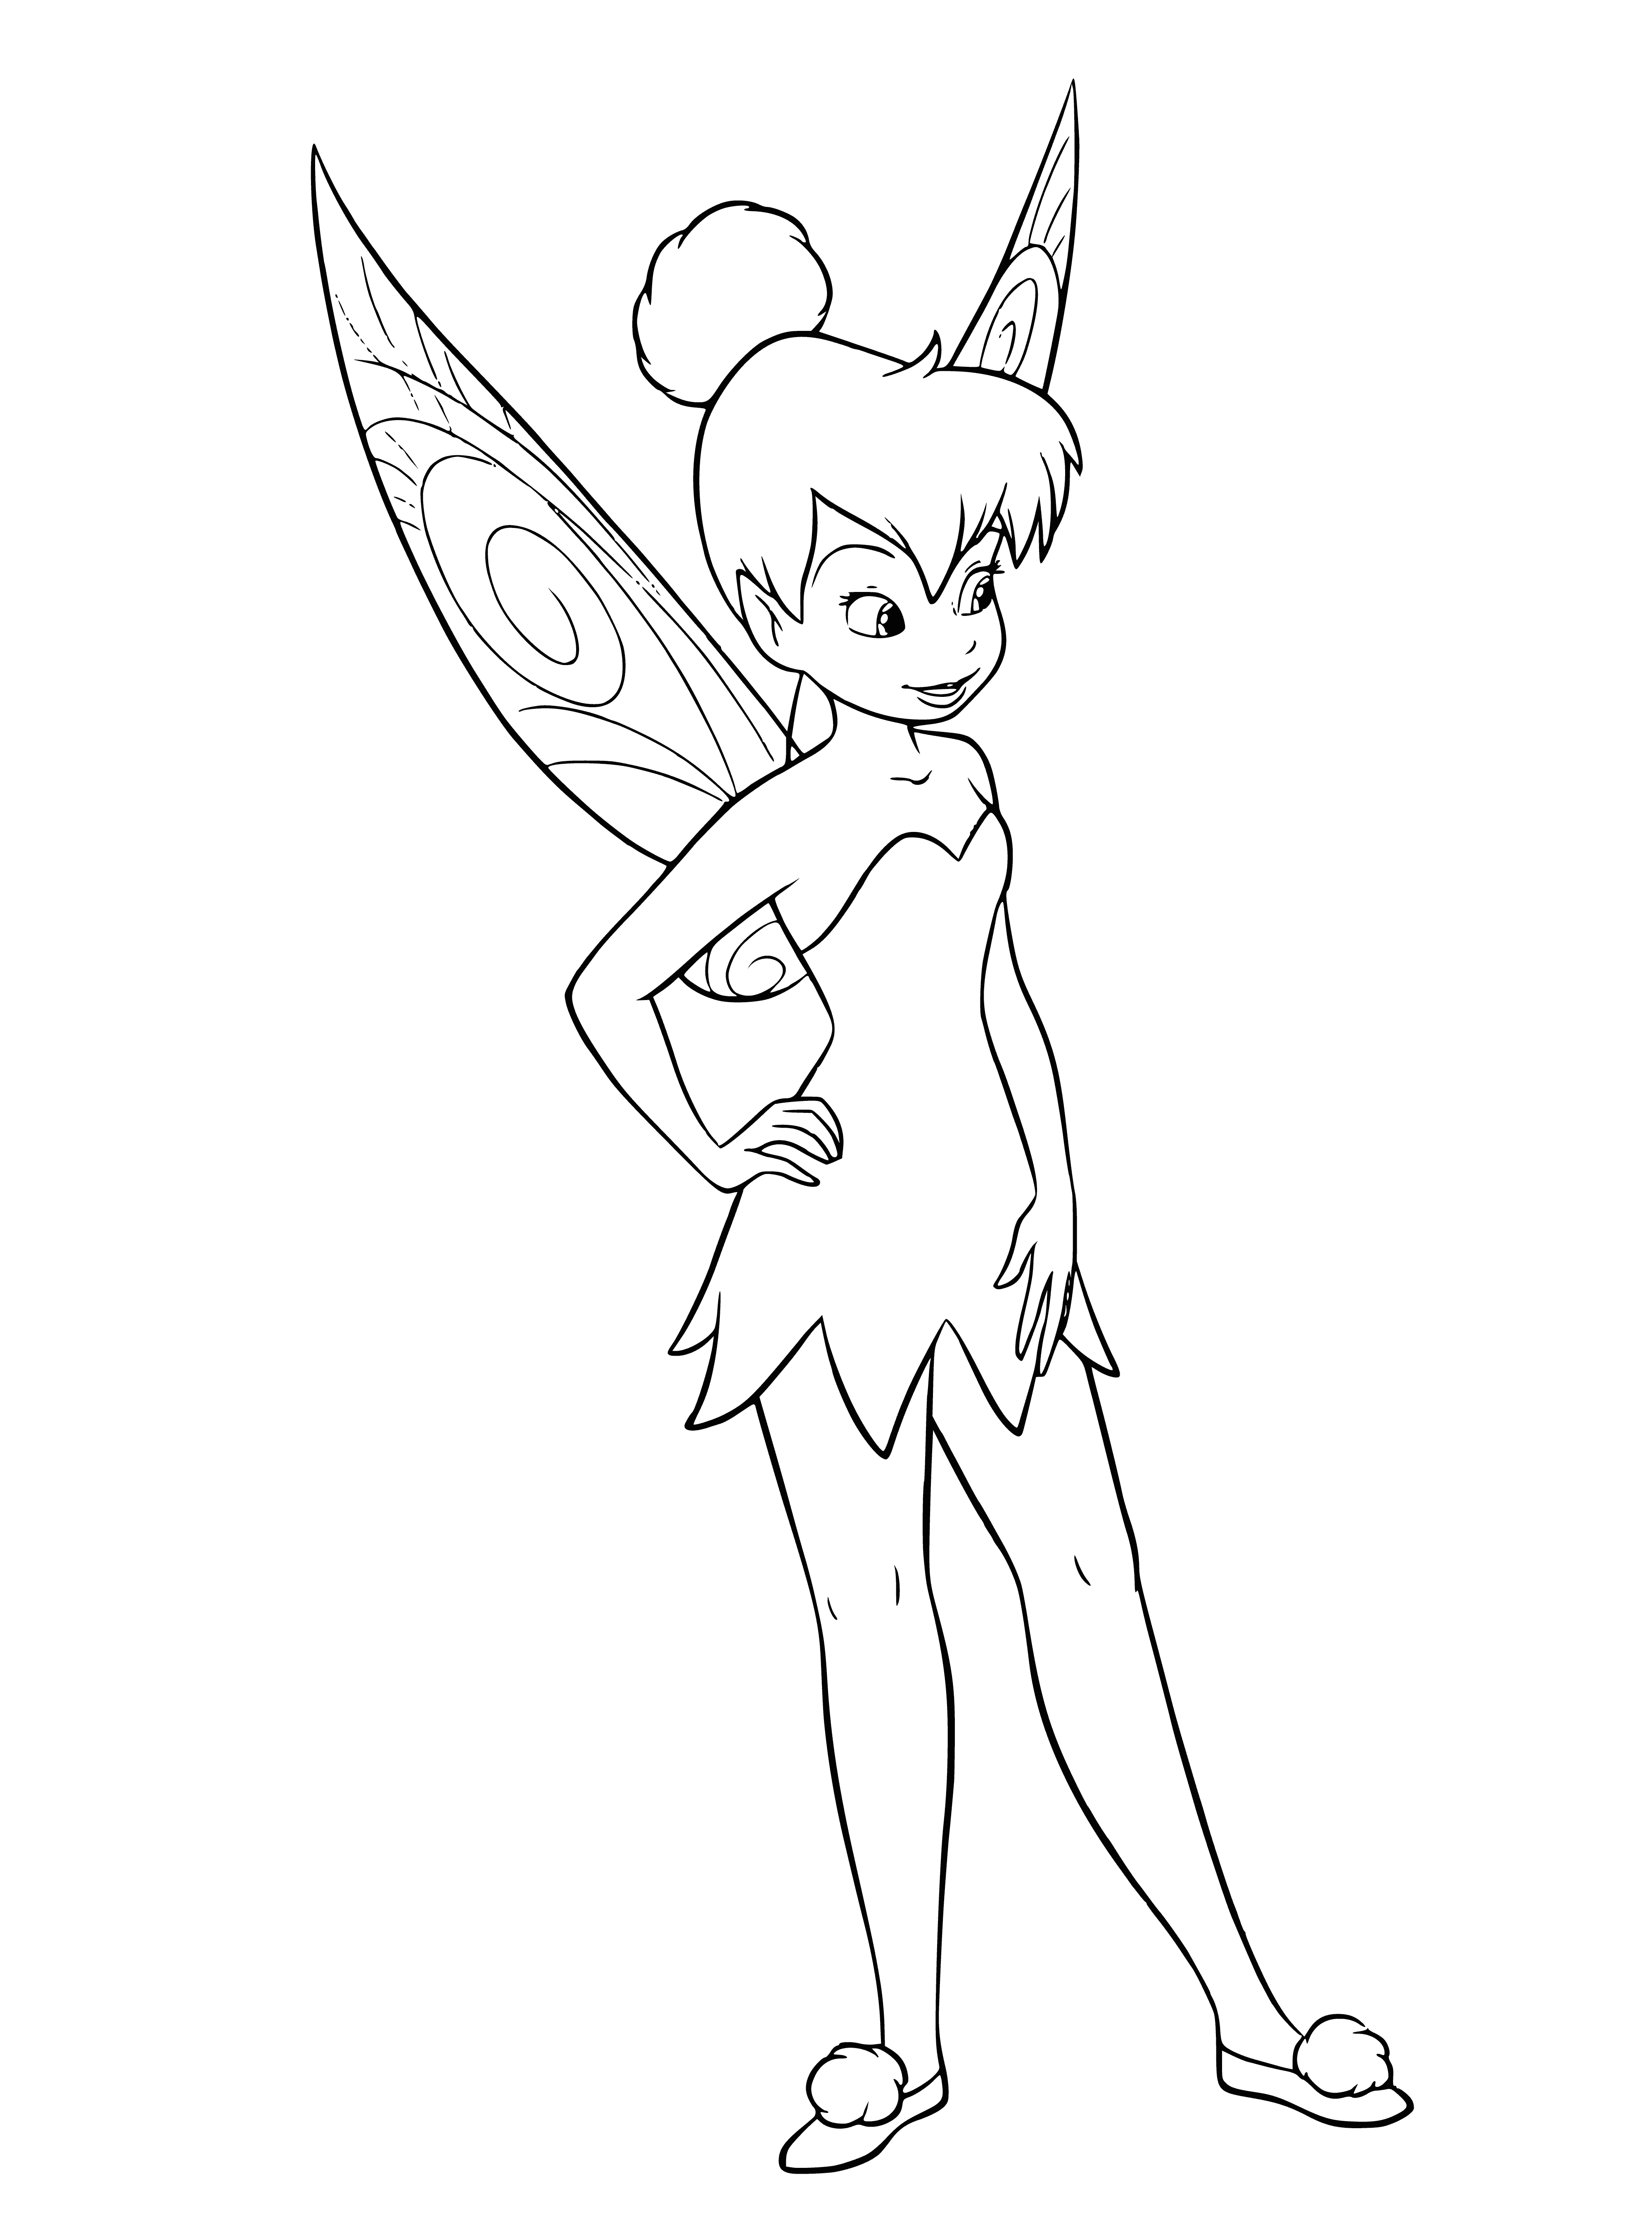 Ding-Ding Fairy coloring page